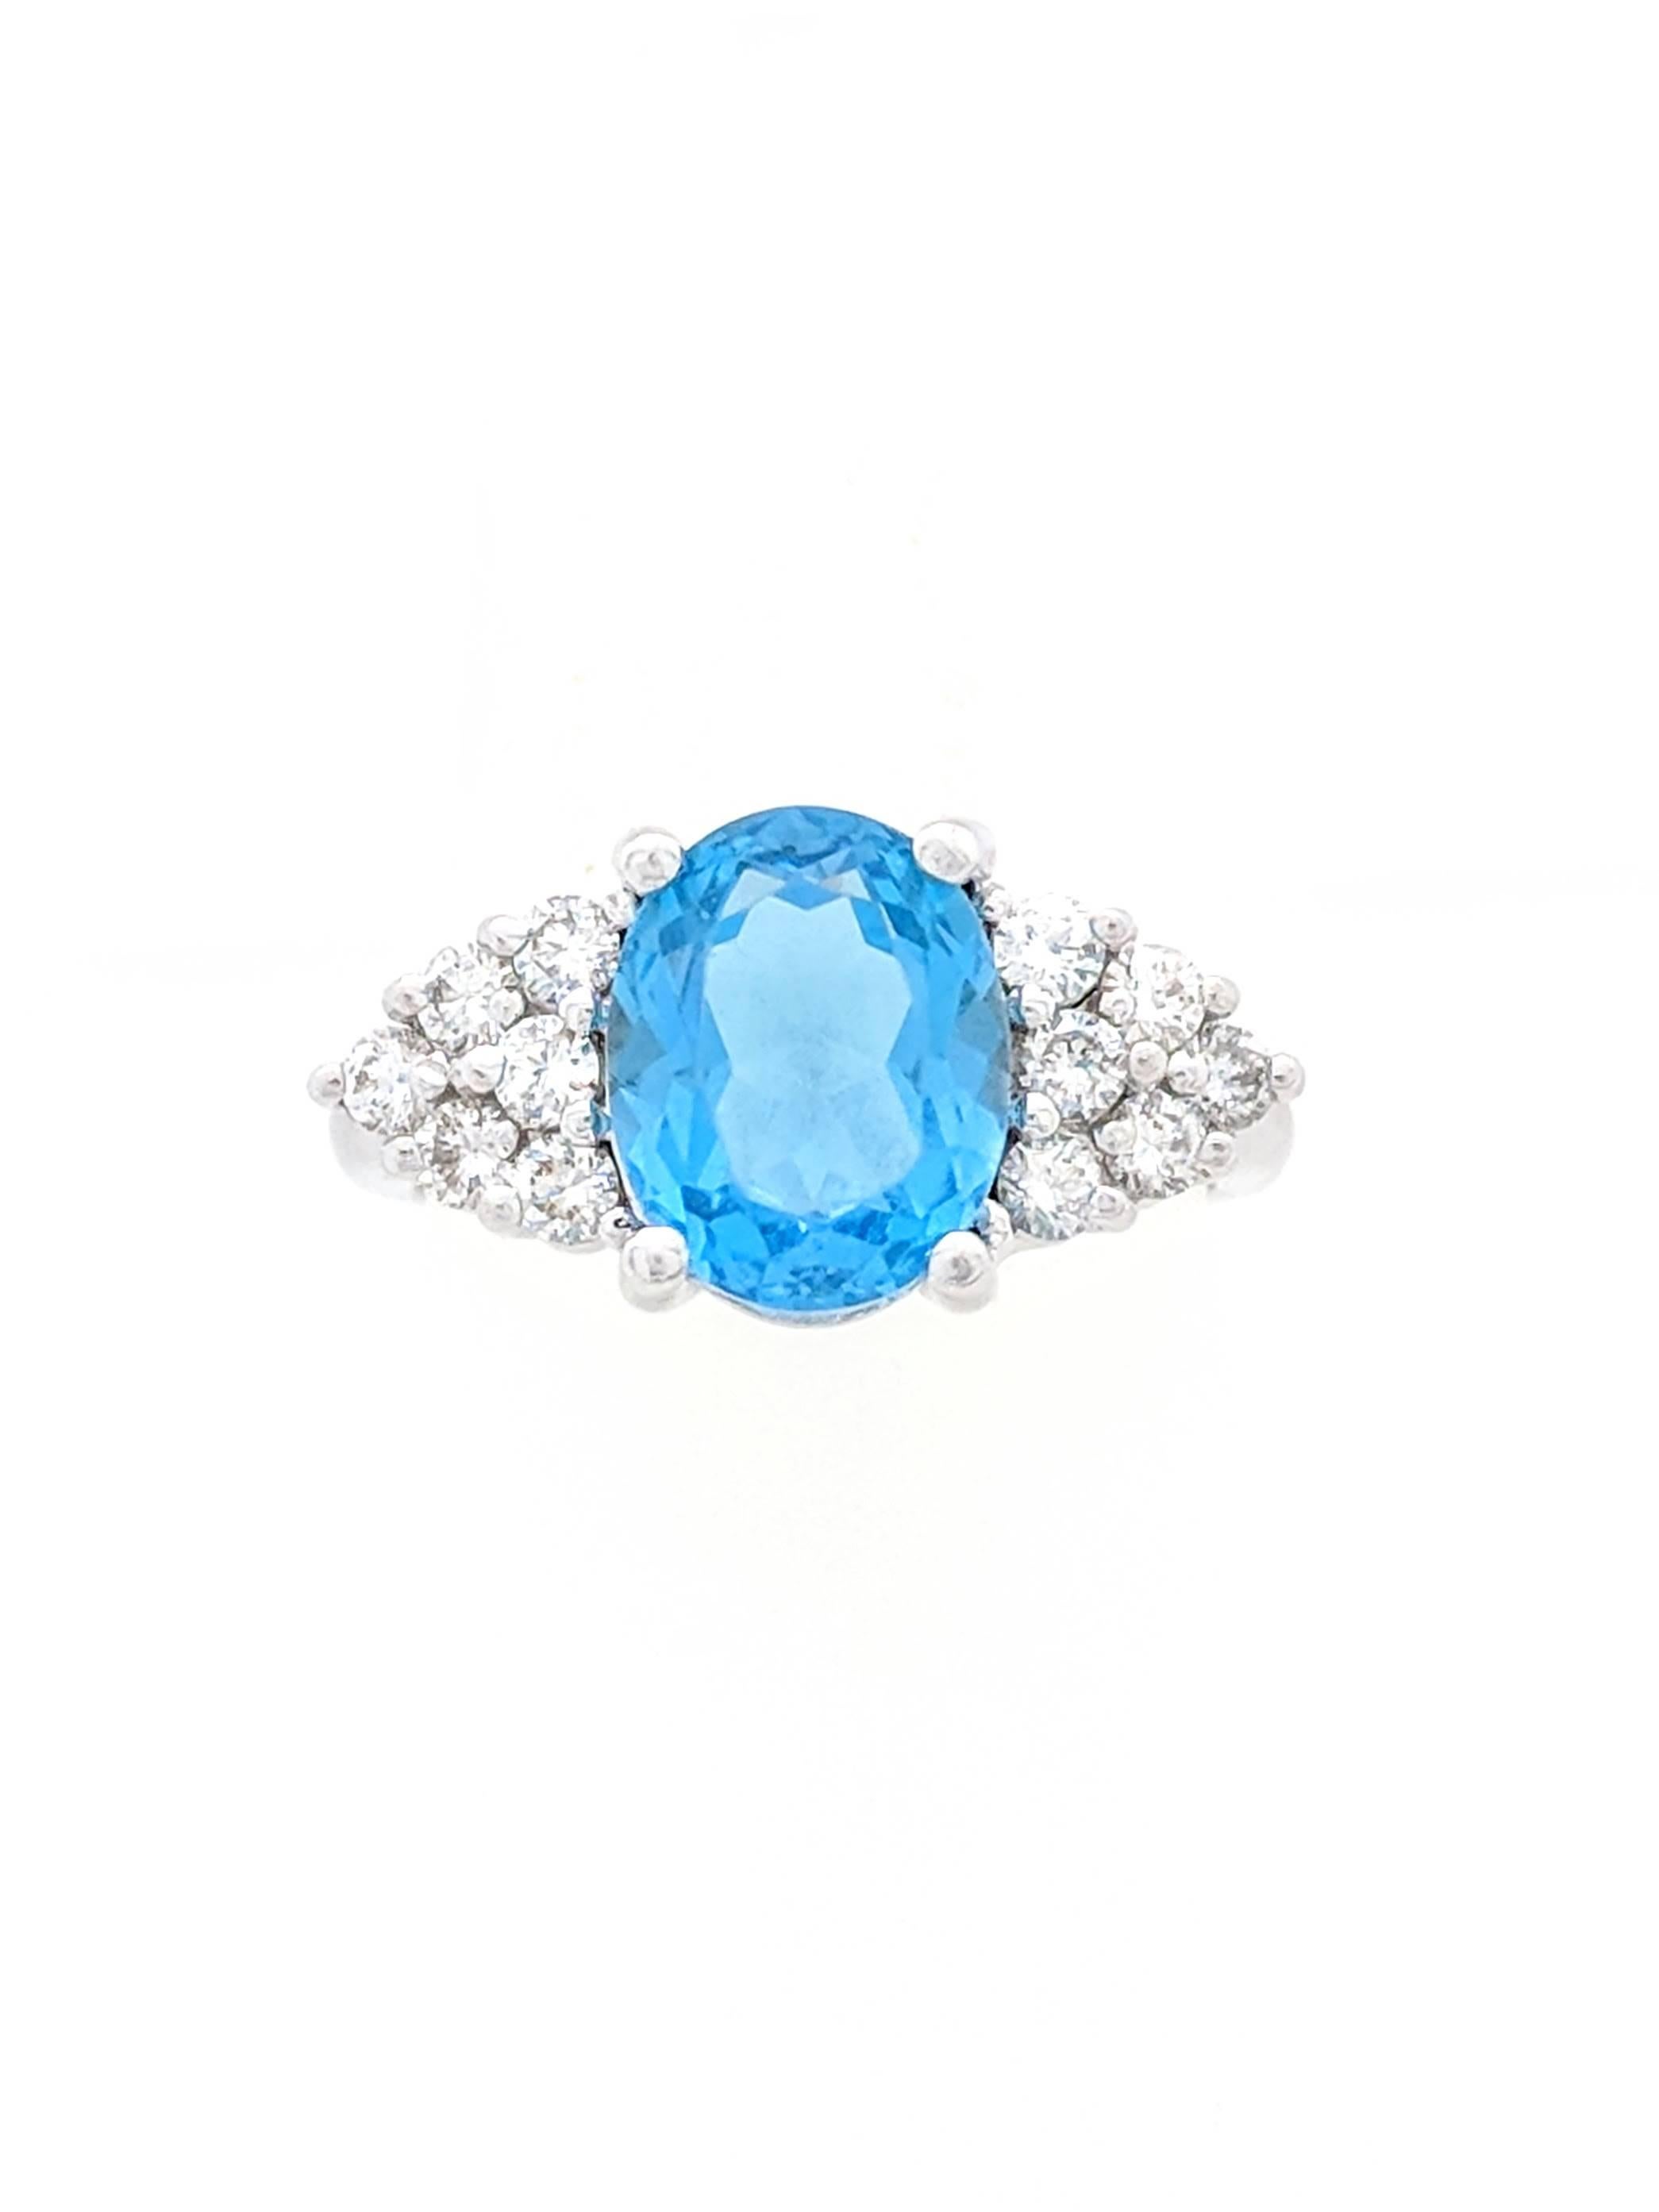 Round Cut 14 Karat White Gold 3.50 Carat Blue Topaz and Diamond Cocktail Ring For Sale